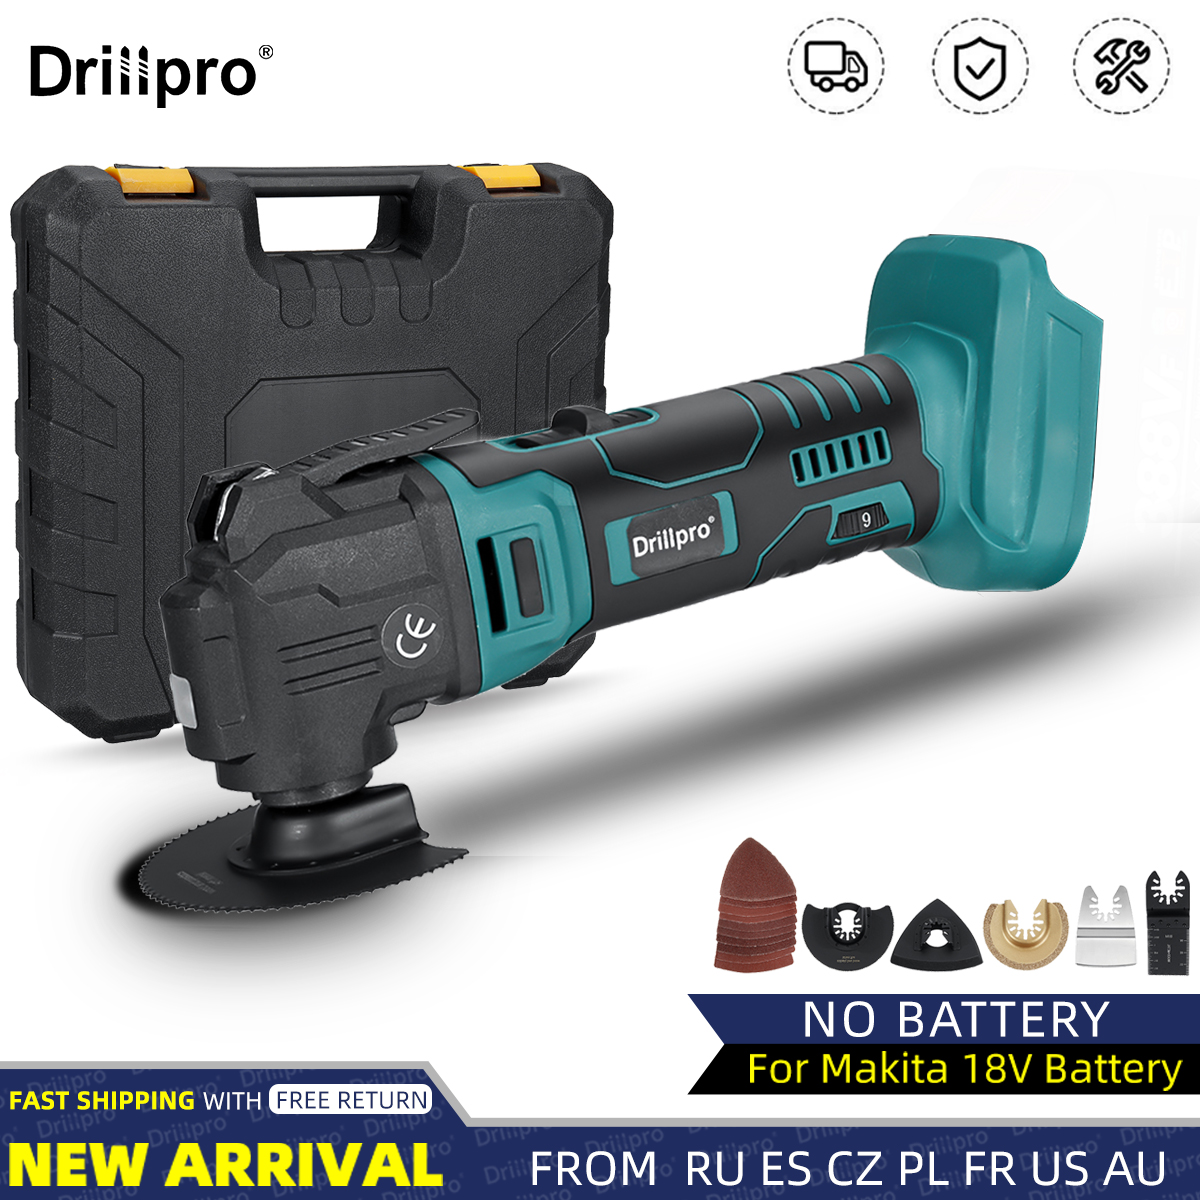 Drillpro-Electric-Cordless-Oscillating-Multi-Tool-Bare-Metal-Machine-Without-Battery-with-Plastic-Bo-1957681-1